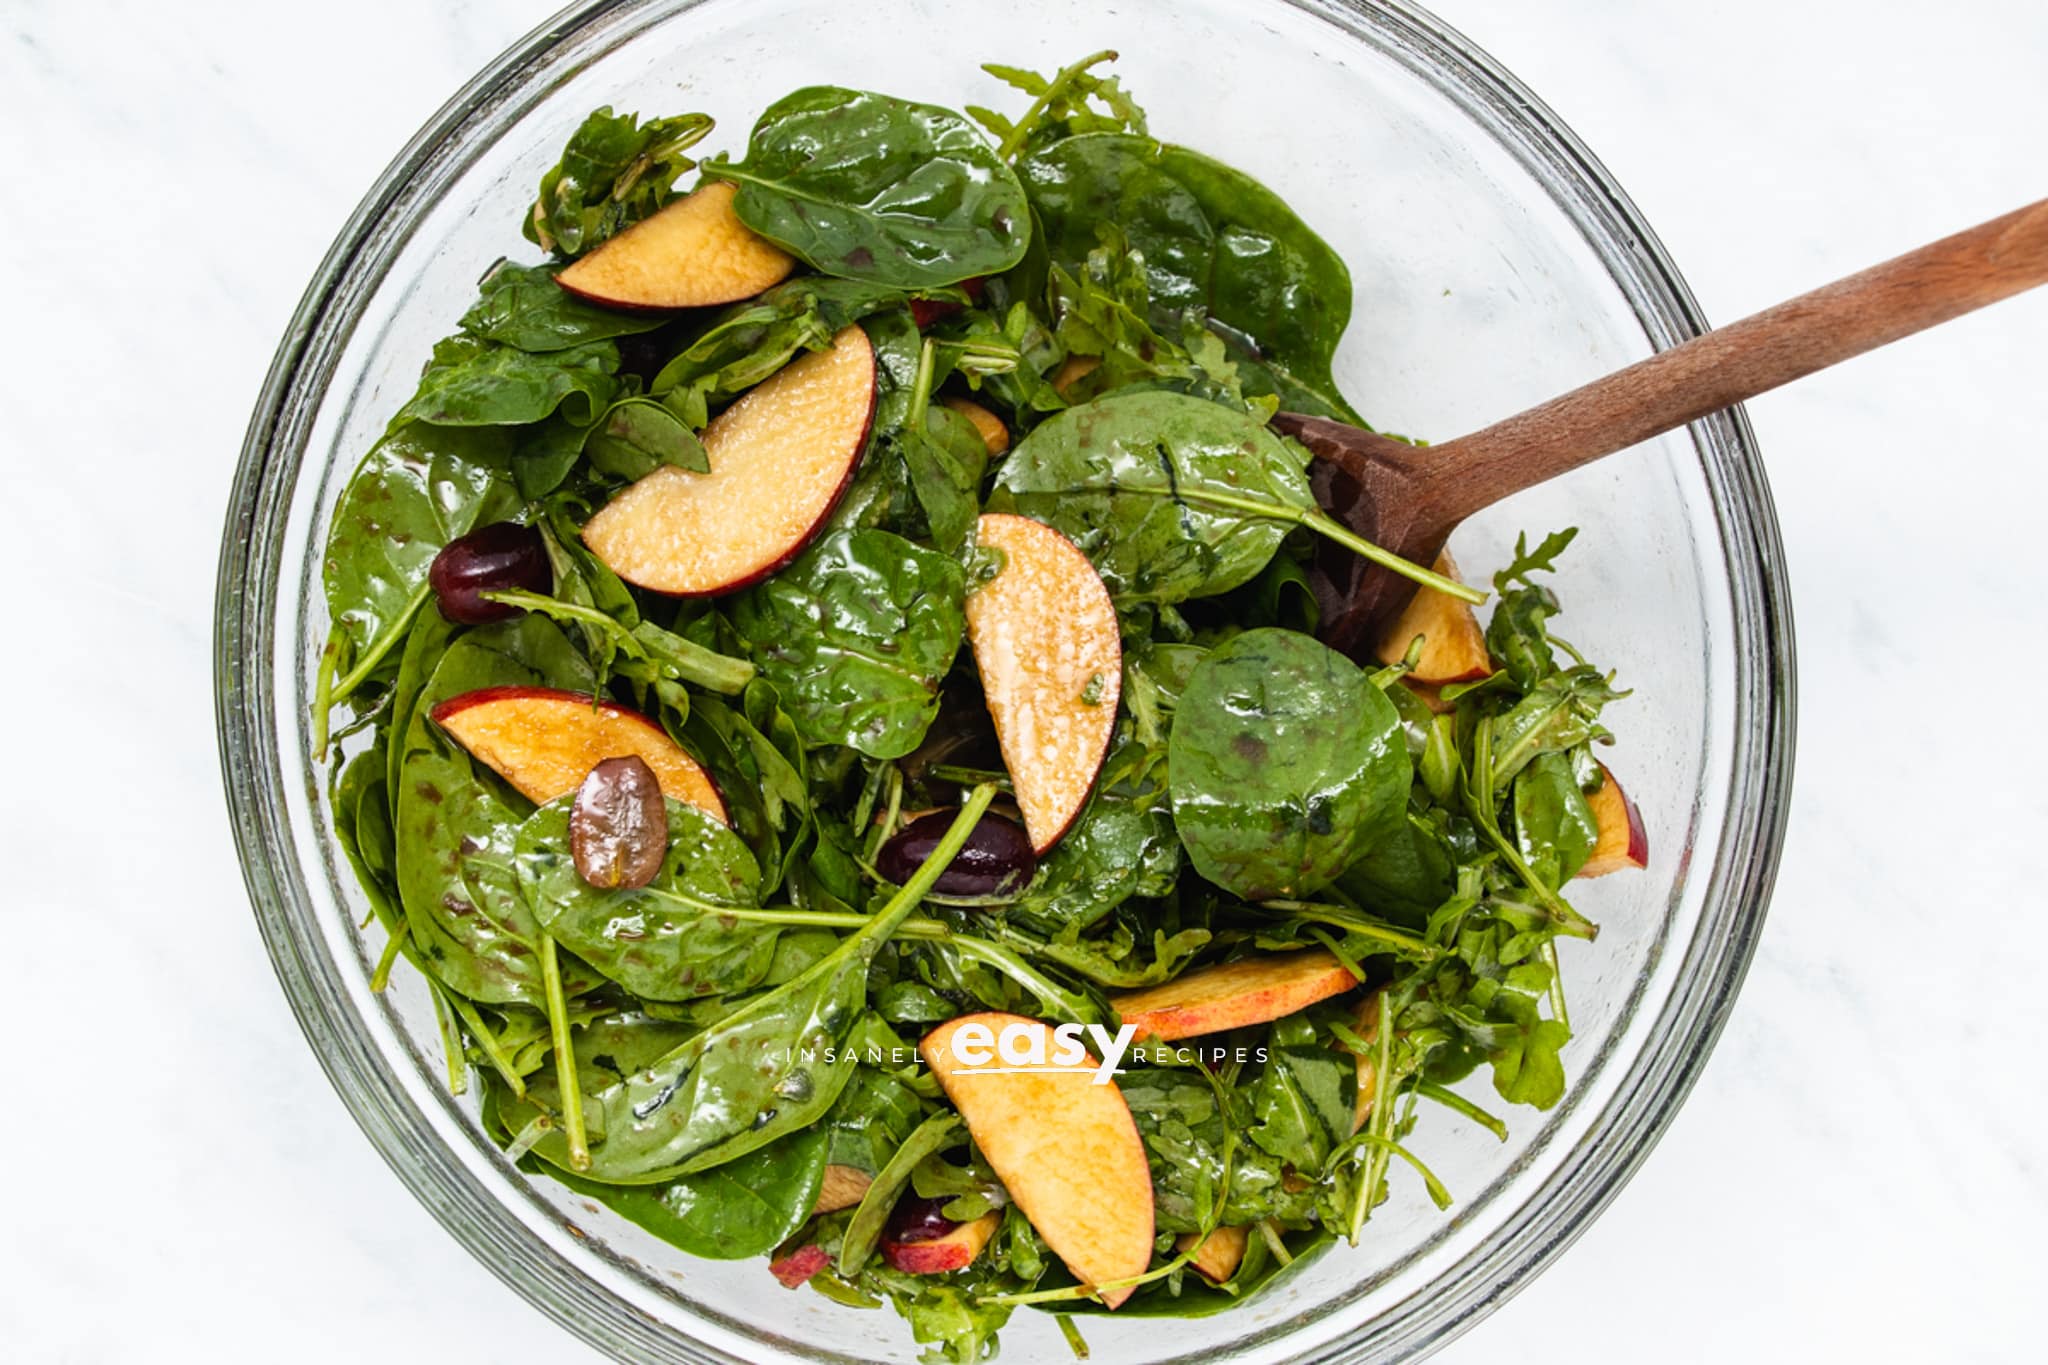 Apple pecan salad tossed with arugula and baby spinach in a mixing bowl.